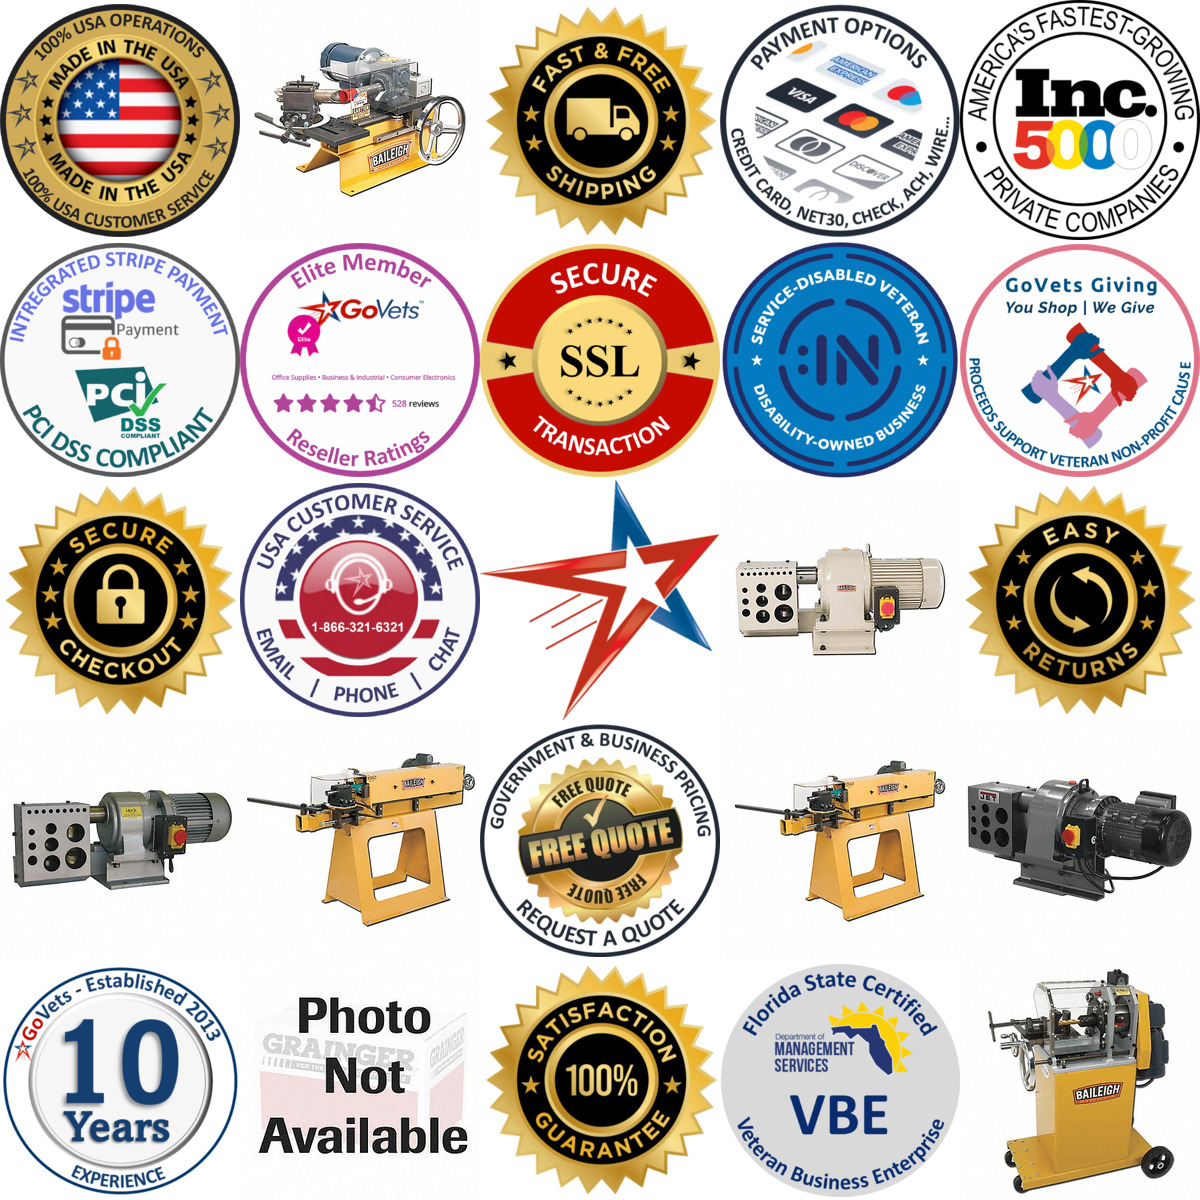 A selection of Corded Pipe and Tube Notchers products on GoVets